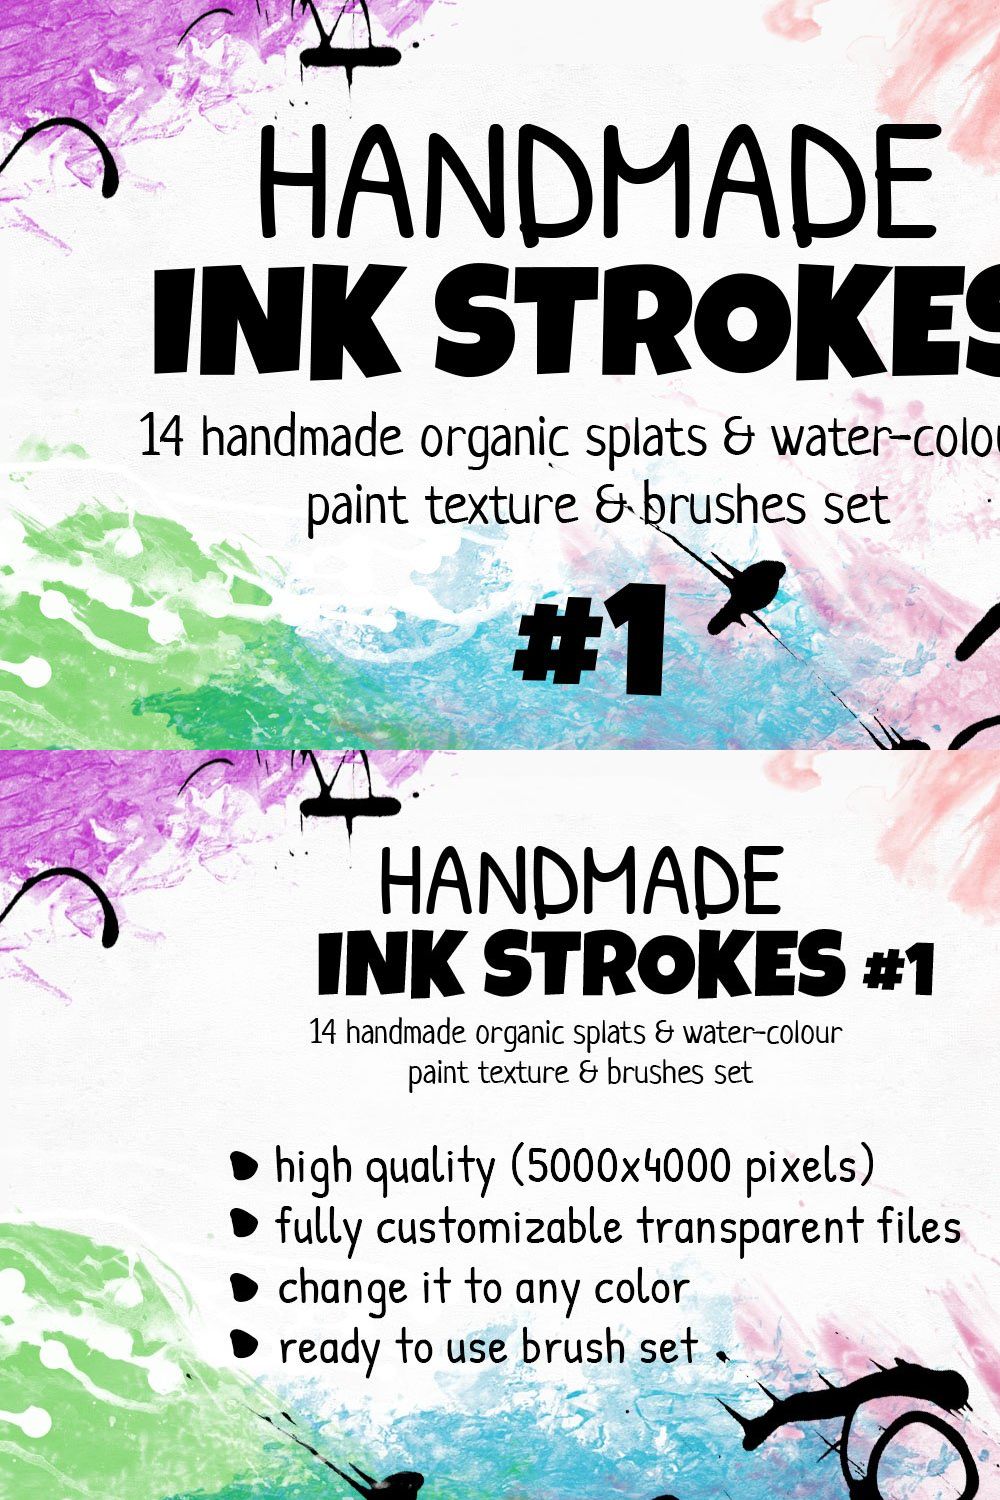 Handmade INK STROKES Pack 14 #1 pinterest preview image.